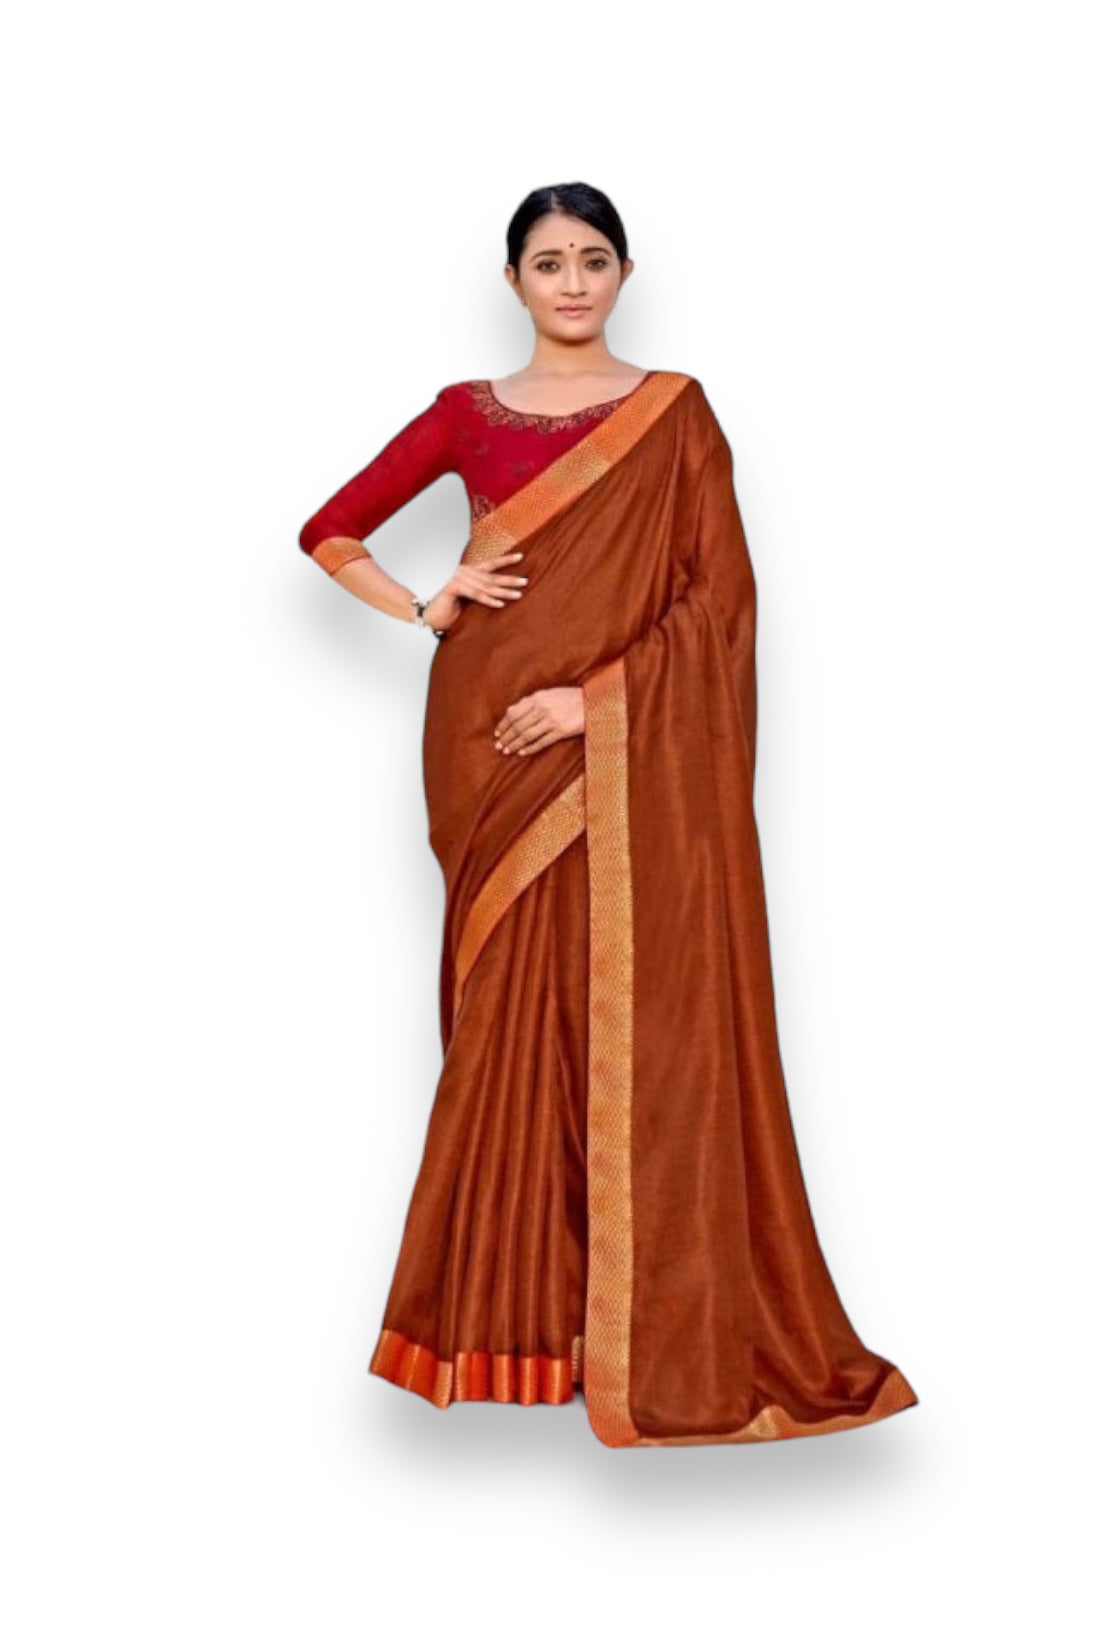 Clearance Sale: Brown Vichitra Silk Casual Wear Lace Work Saree at Unbeatable Prices!